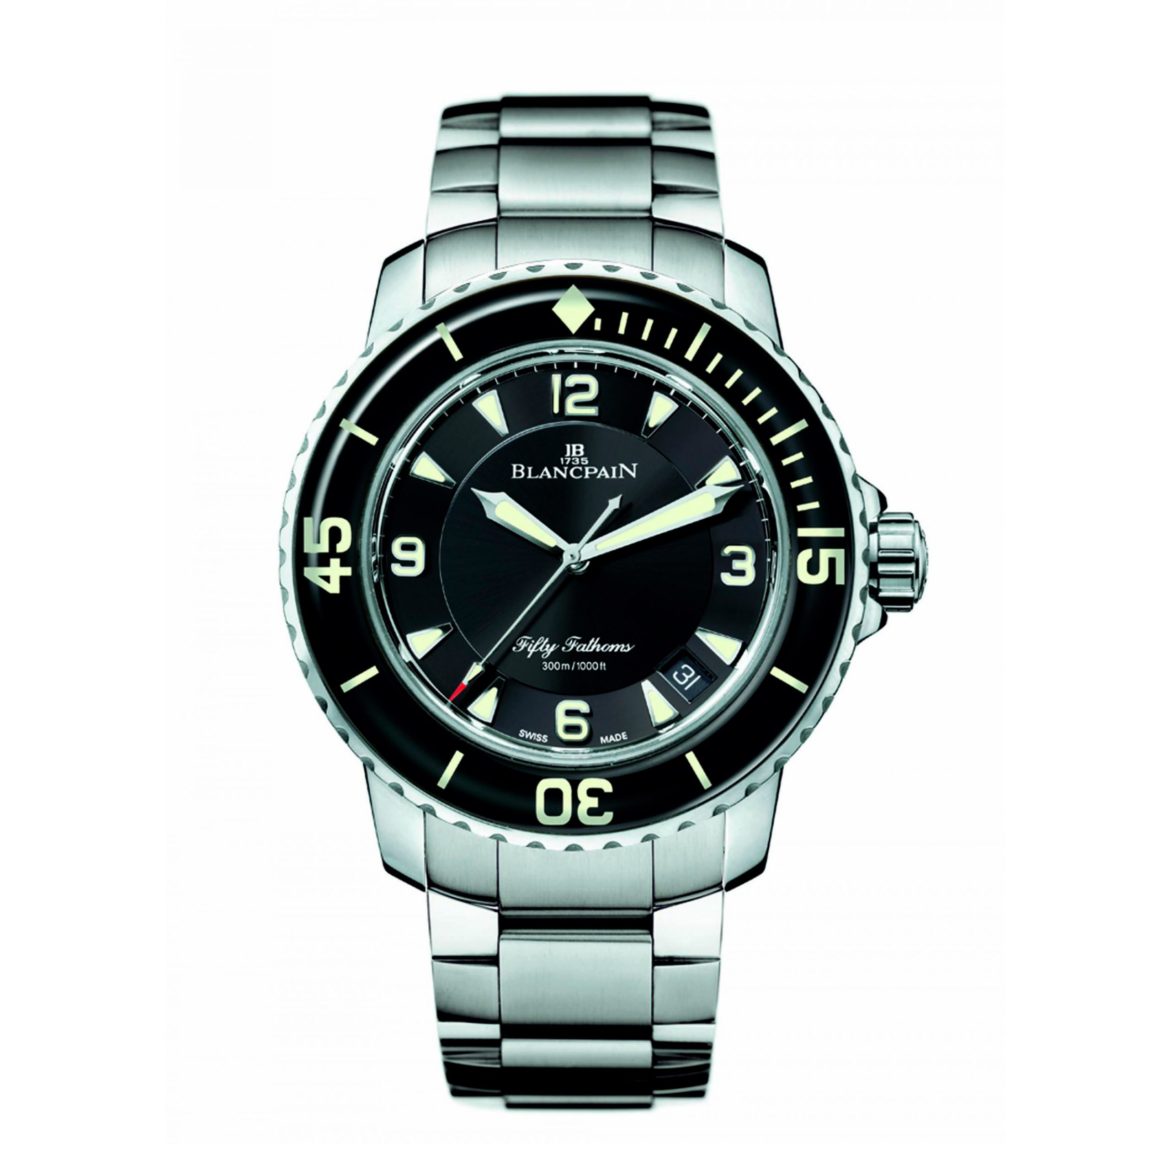 BLANCPAIN Fifty Fathoms  5015 1130 71S